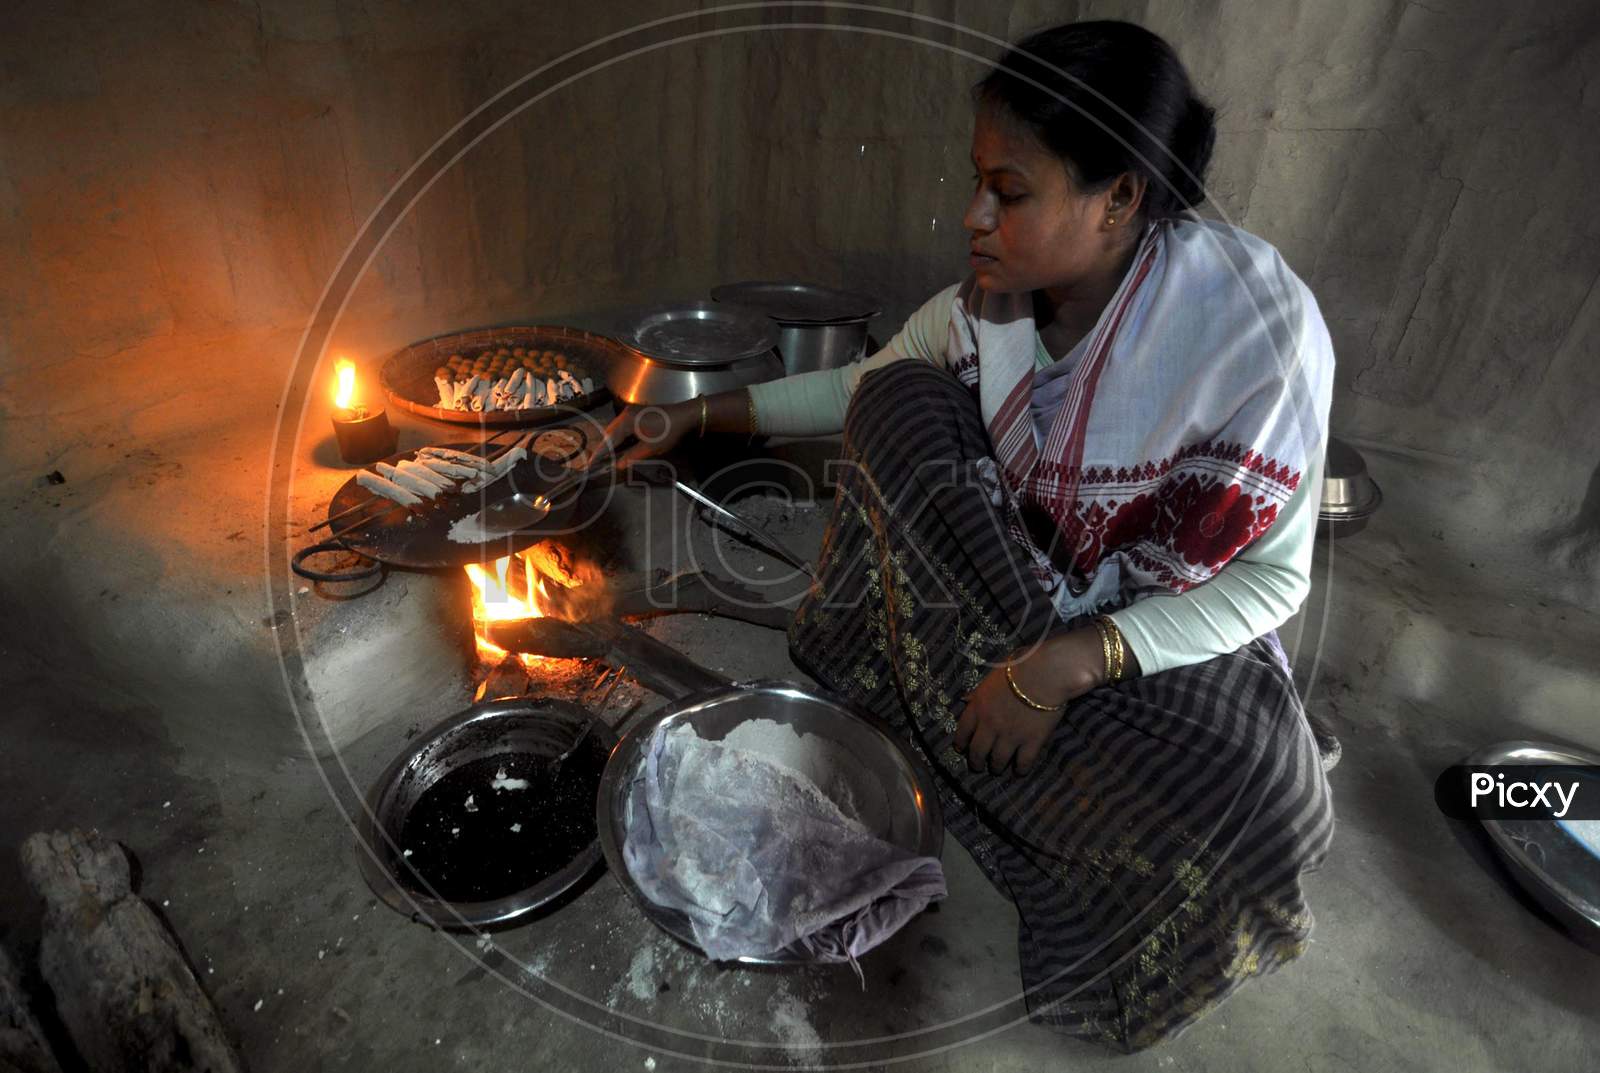 A Woman making  pitha on the eve of Bhogali Bihu Festival In Mayong Village In Morigaon District Of Assam, Jan. 11, 2021.